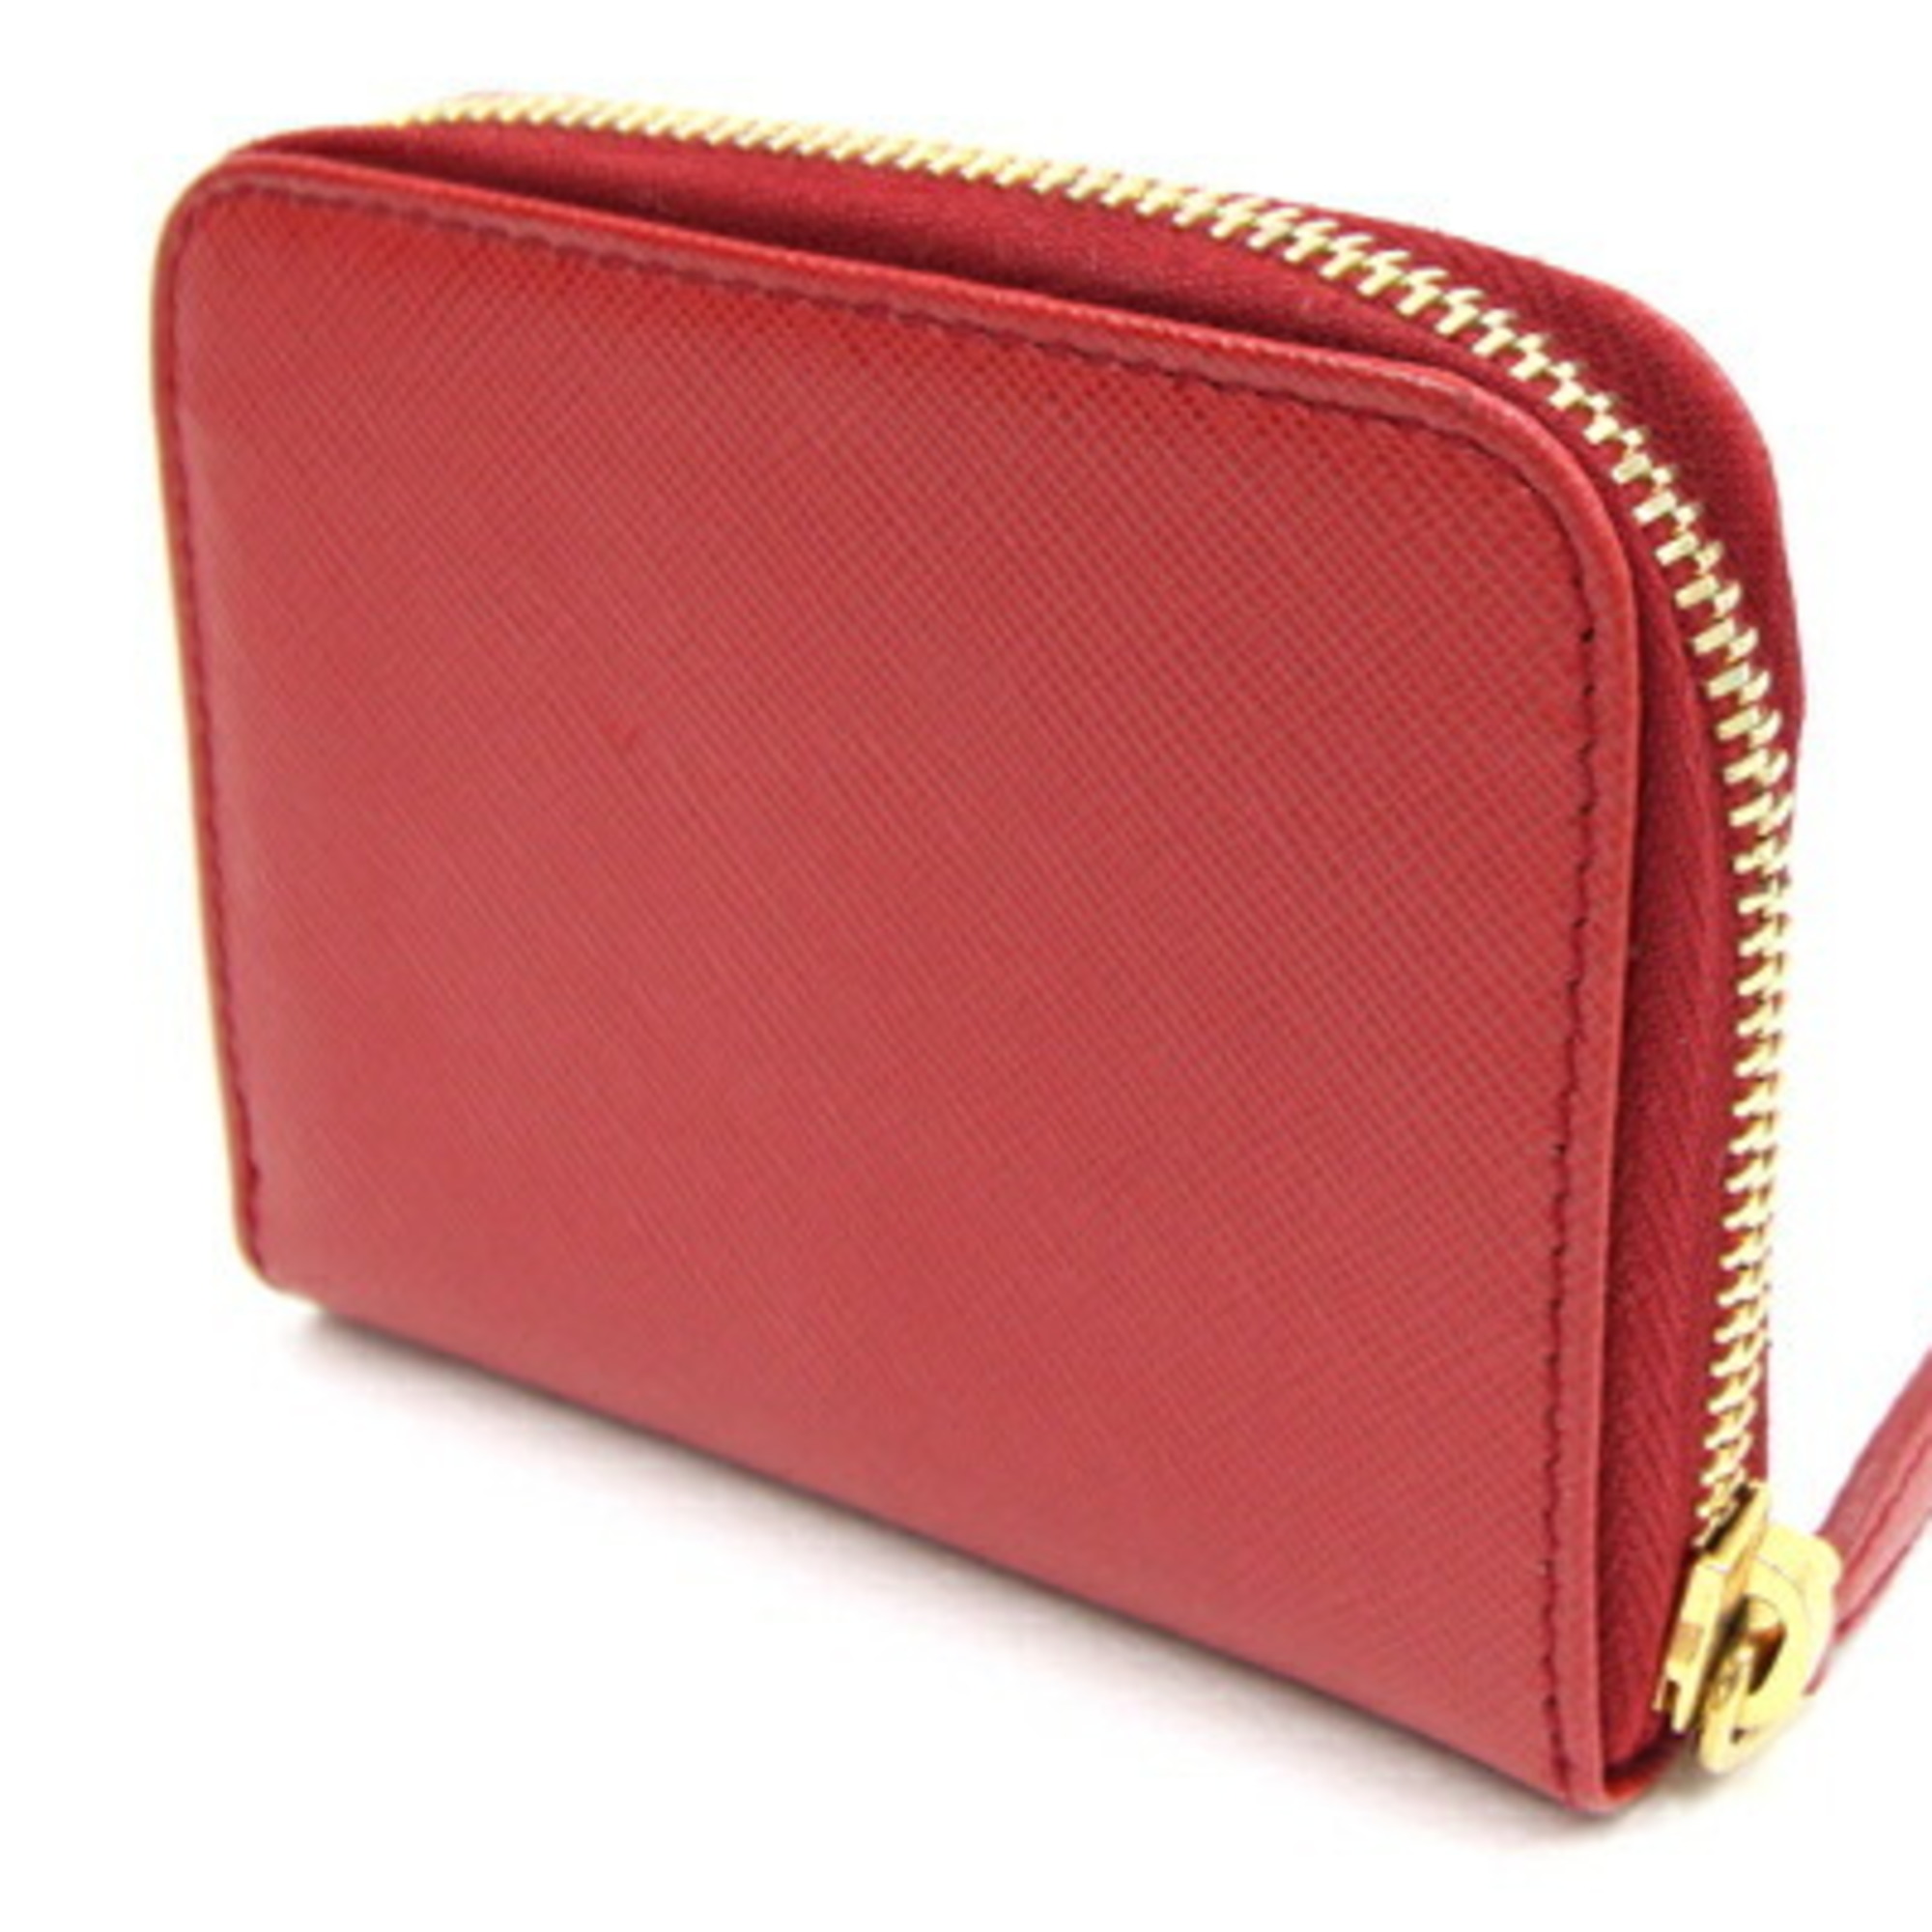 Prada Coin Case 1MM268 Red Leather Compact Wallet Purse Women's PRADA